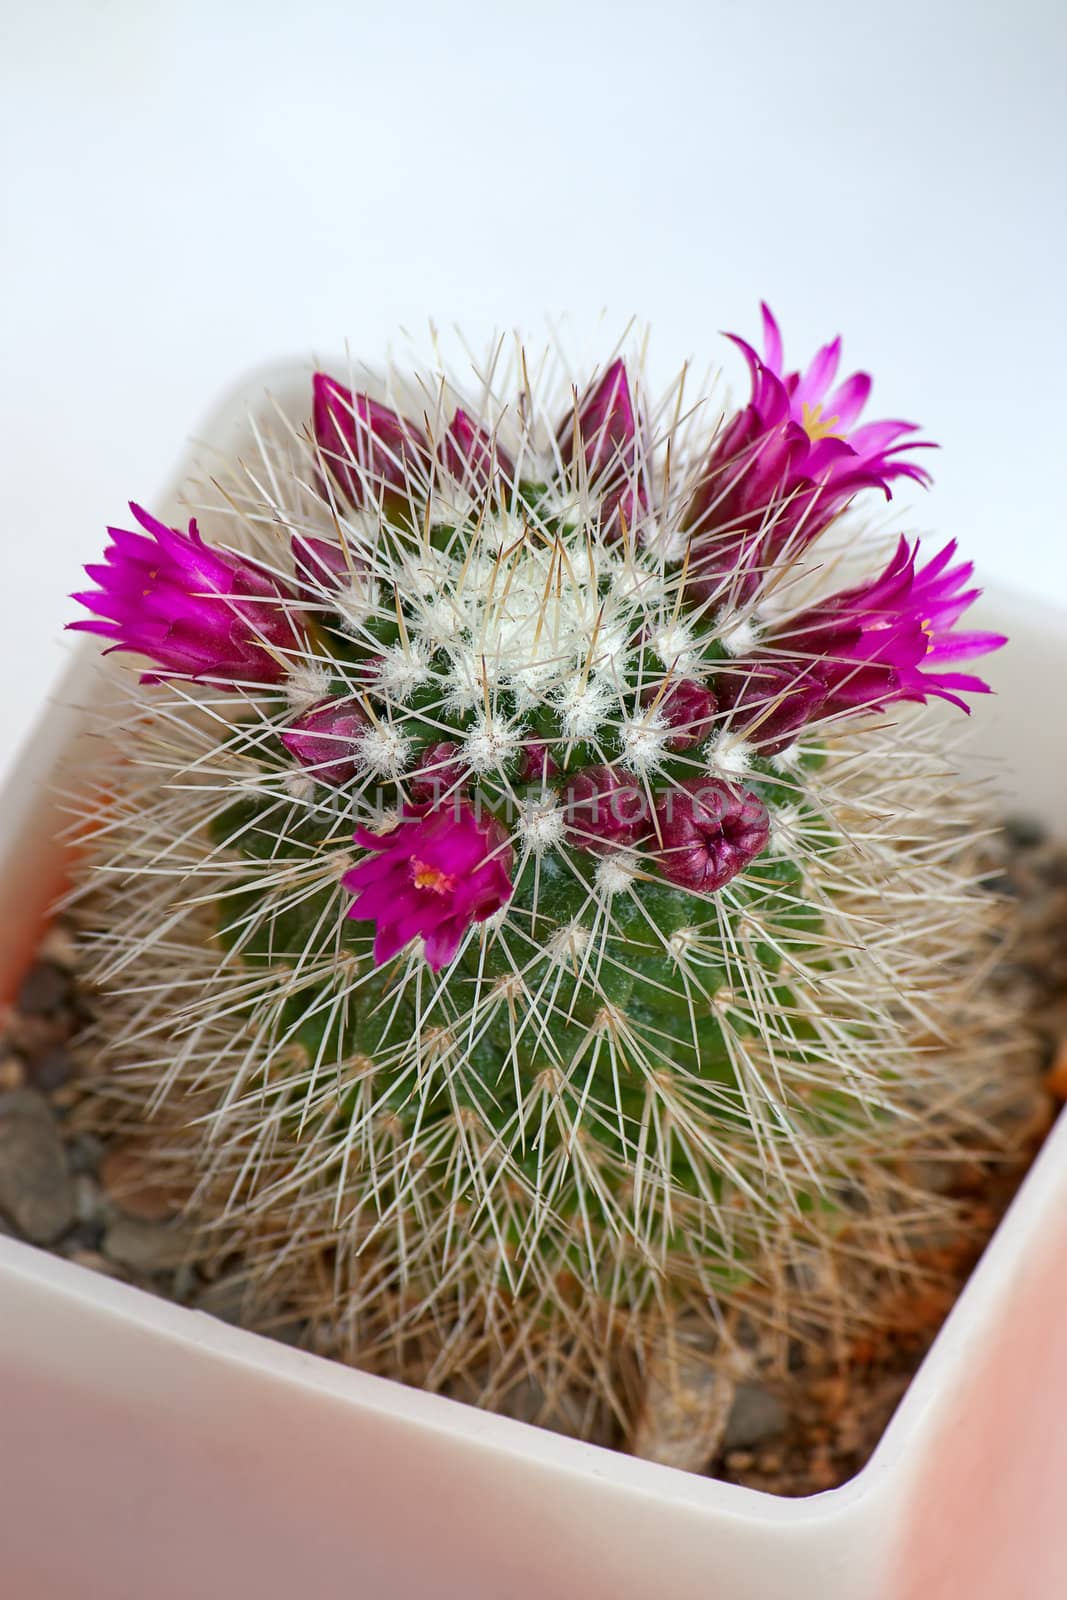 Cactus with flowers  on light  background (Mammillaria).Image with shallow depth of field.